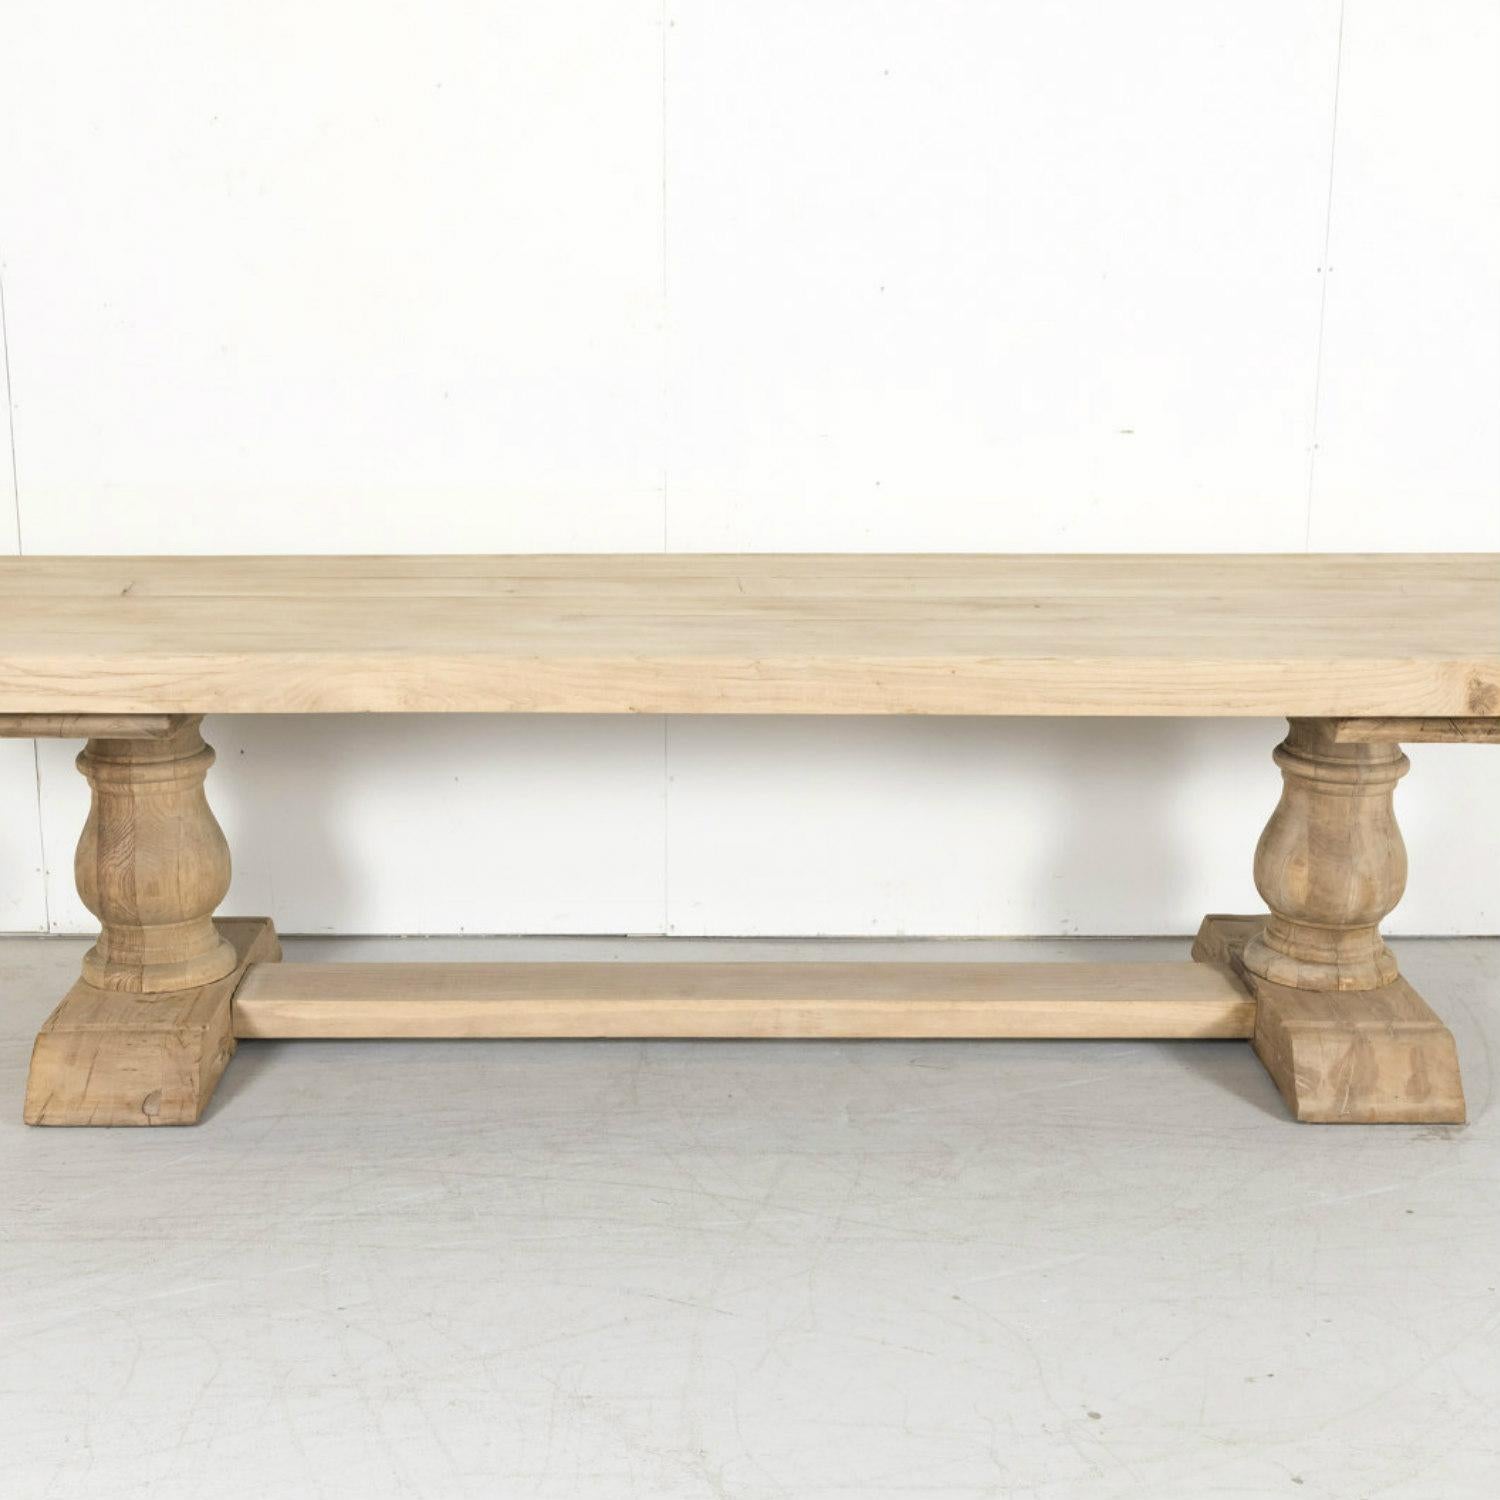 Early 20th Century Bleached Oak French Trestle Dining Table with Baluster Legs 5